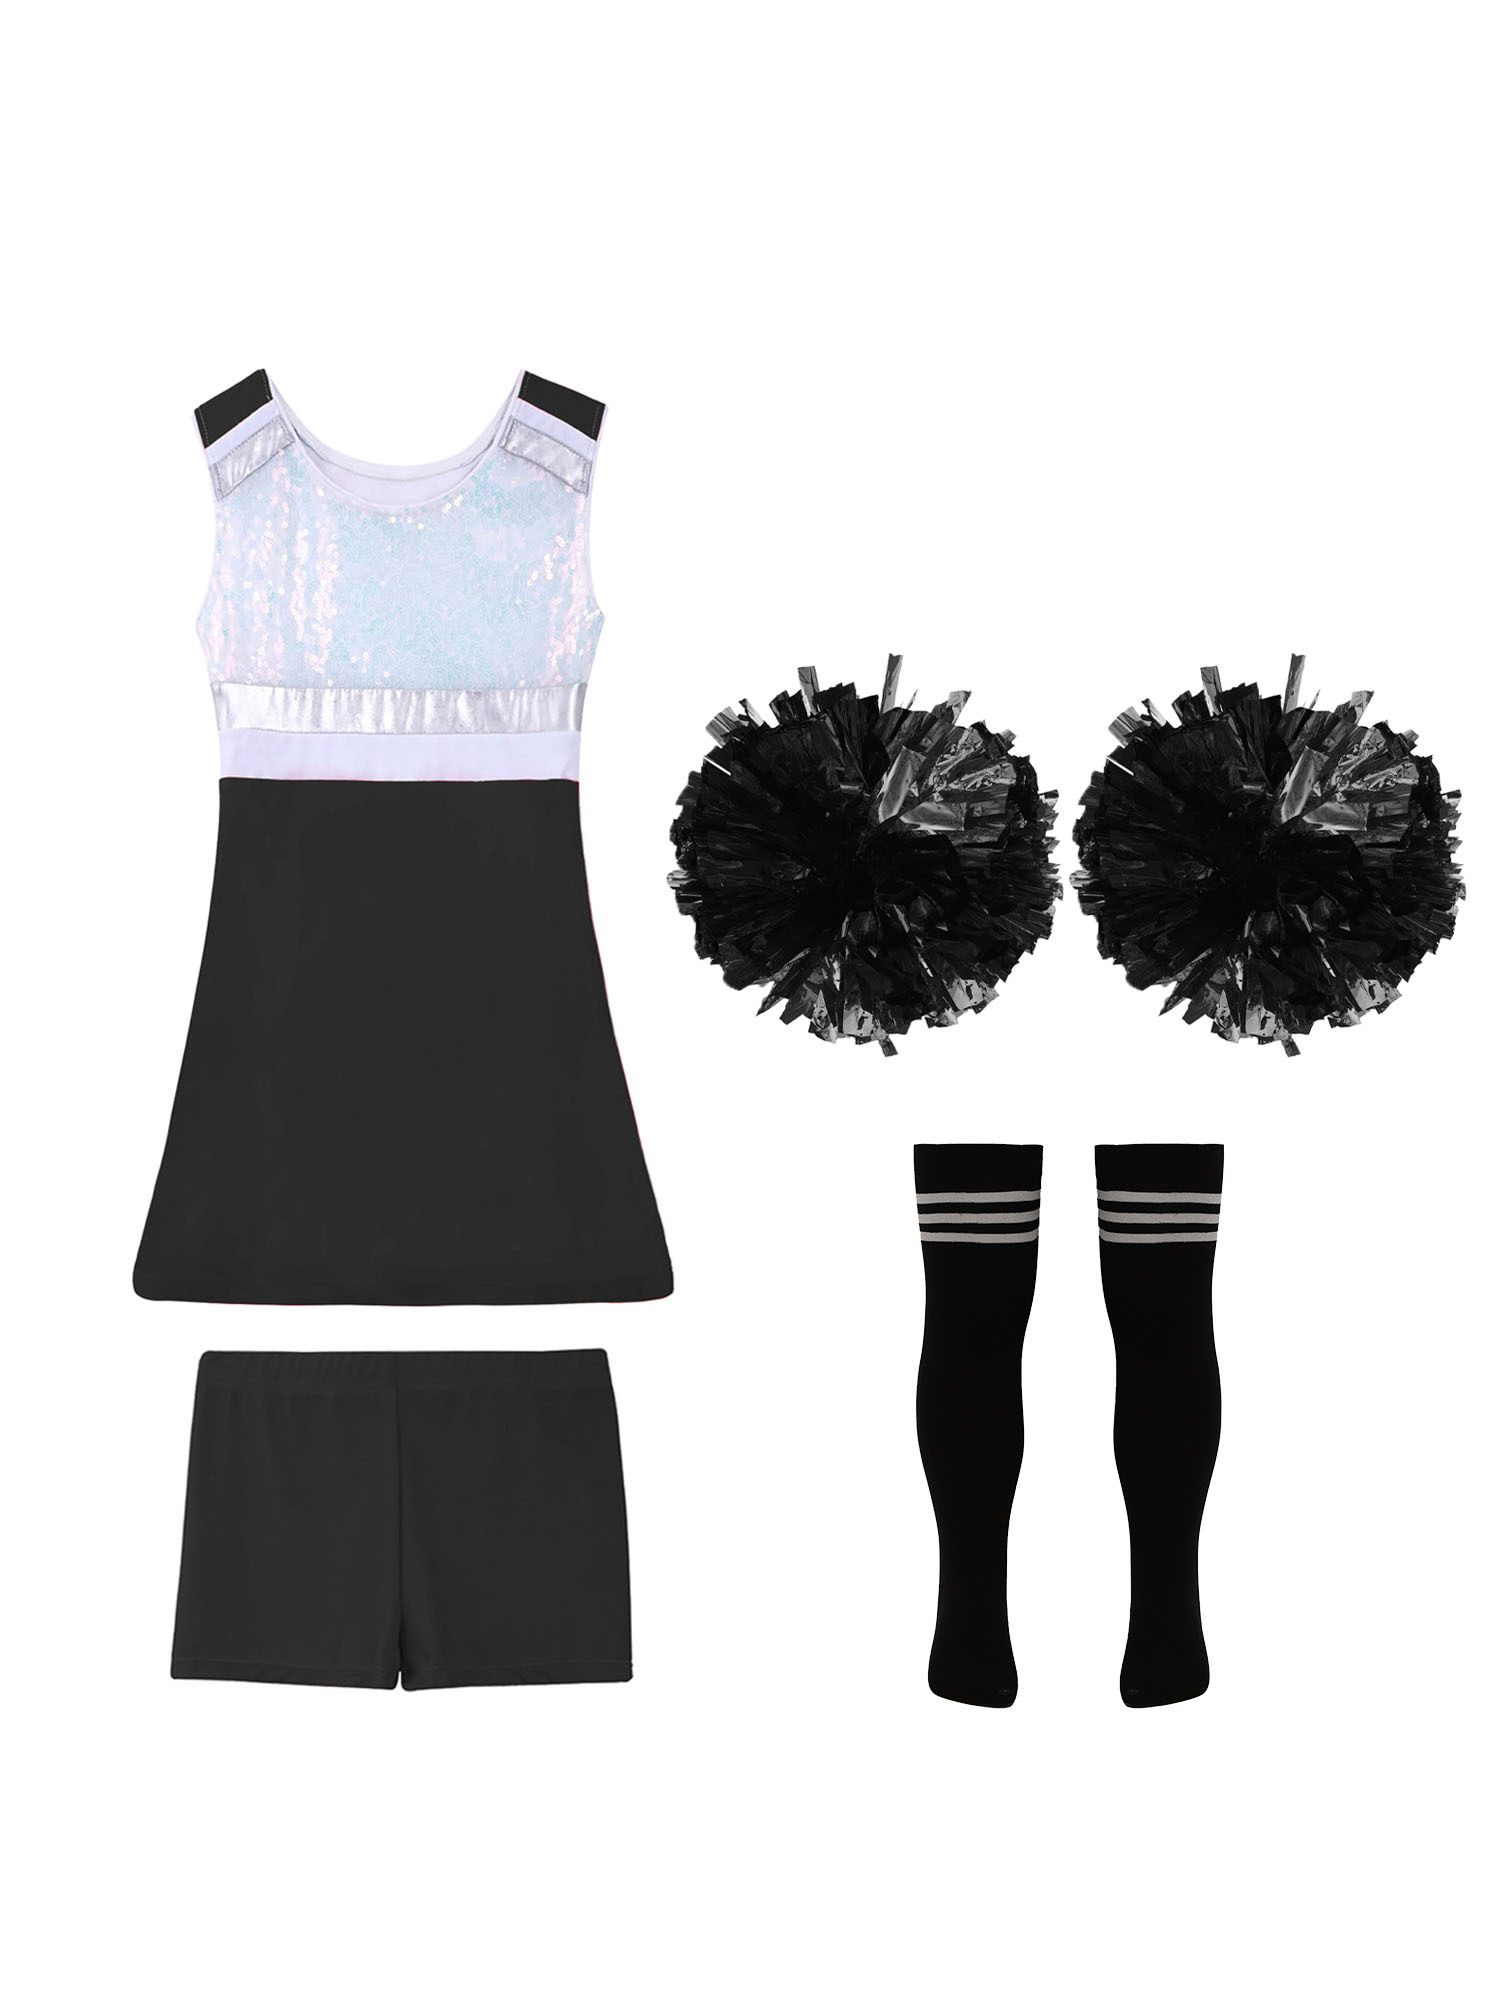 TiaoBug Kids Girls Cheer Leader Uniform Sports Games Cheerleading Dance Outfits Halloween Carnival Fancy Dress Up A Black&White-A 14 - image 4 of 5